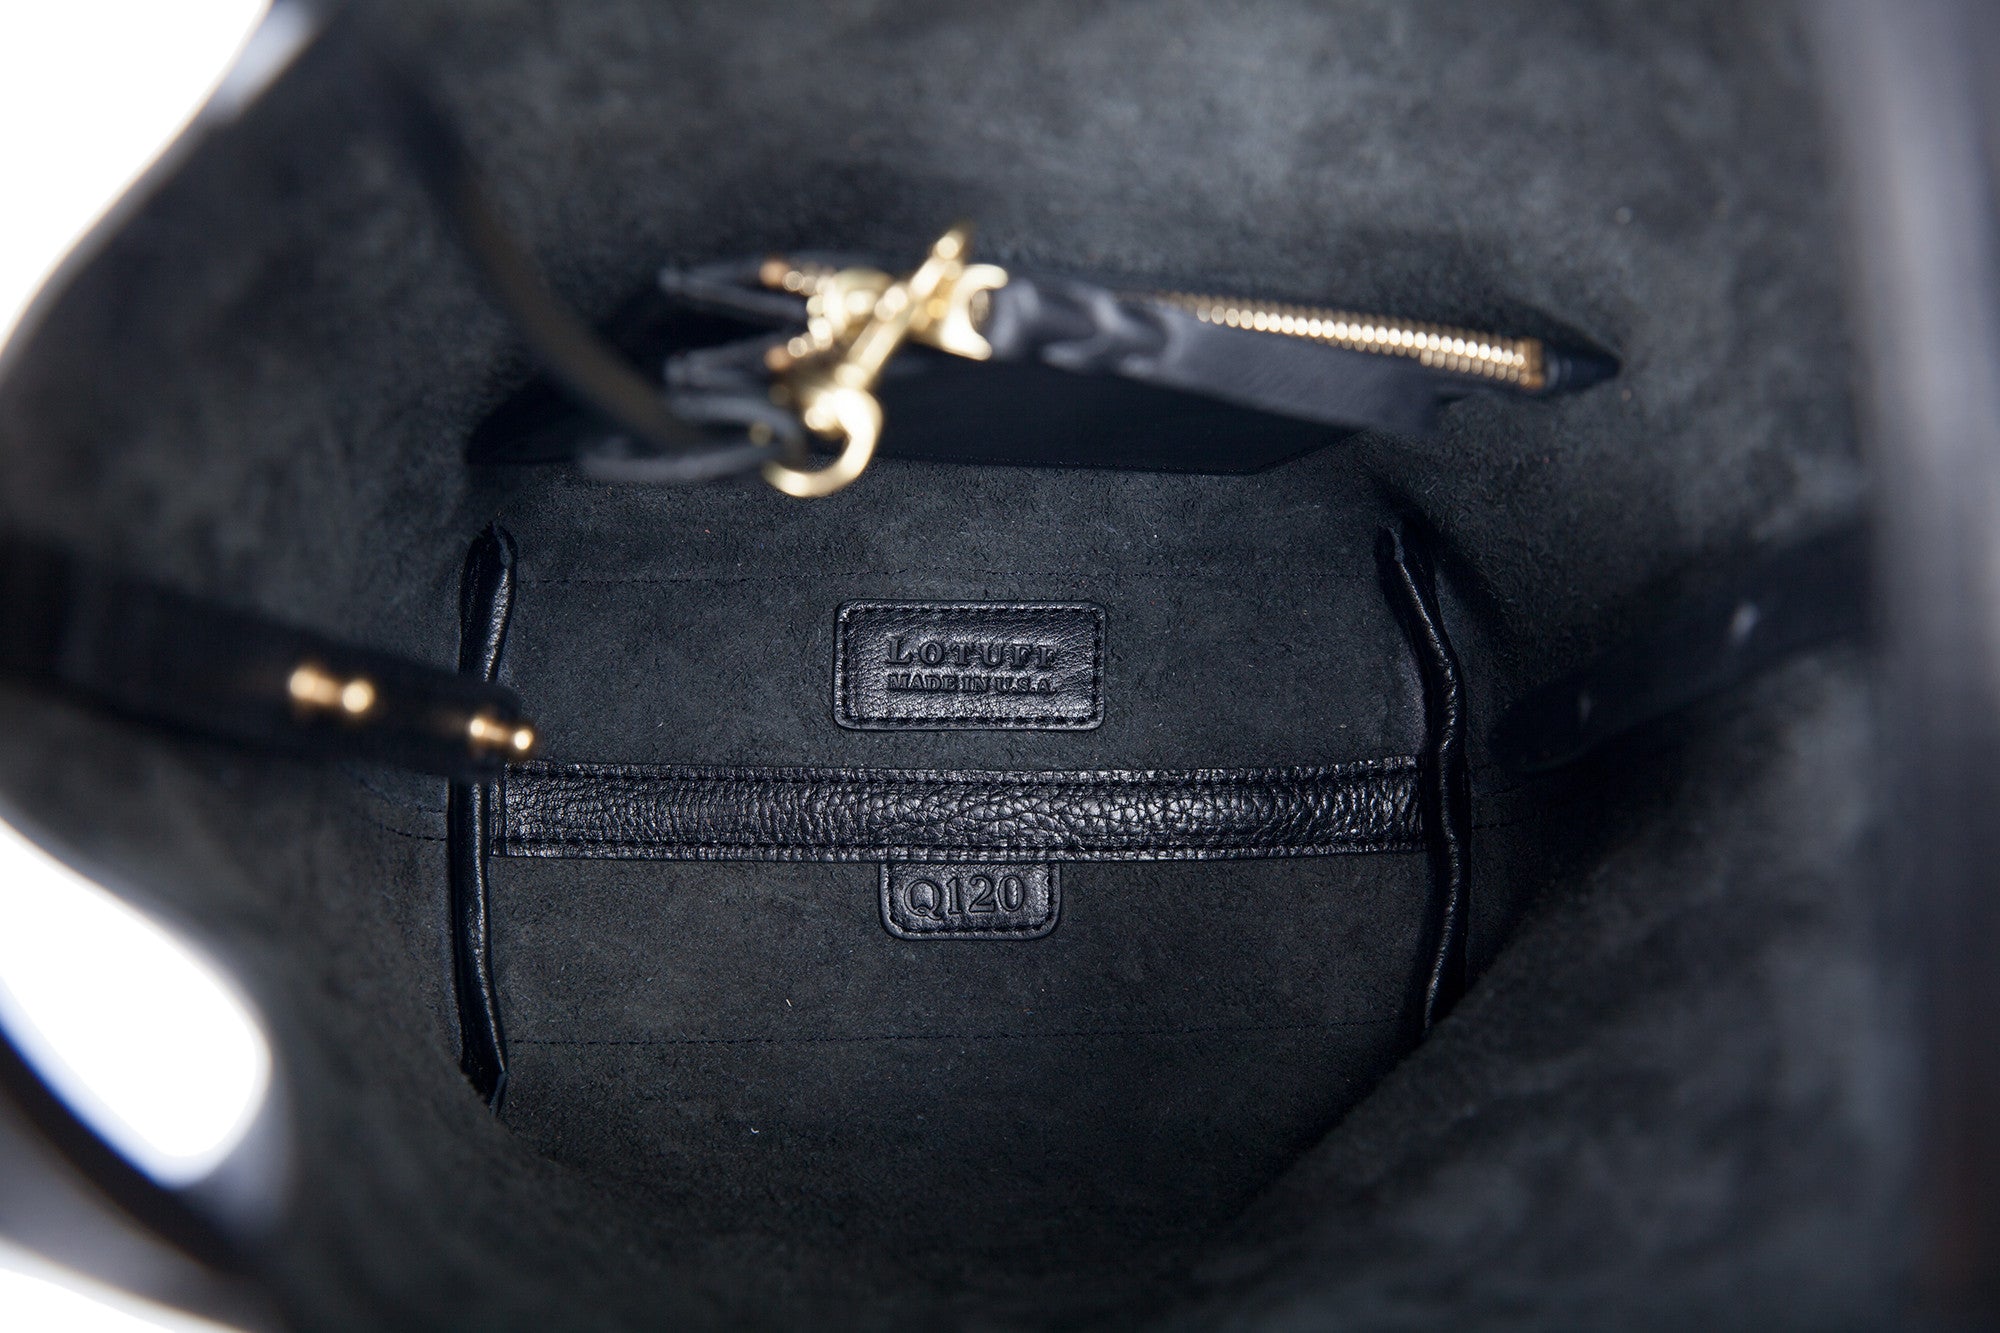 Inner Leather Pocket of The One-Piece Bag Black